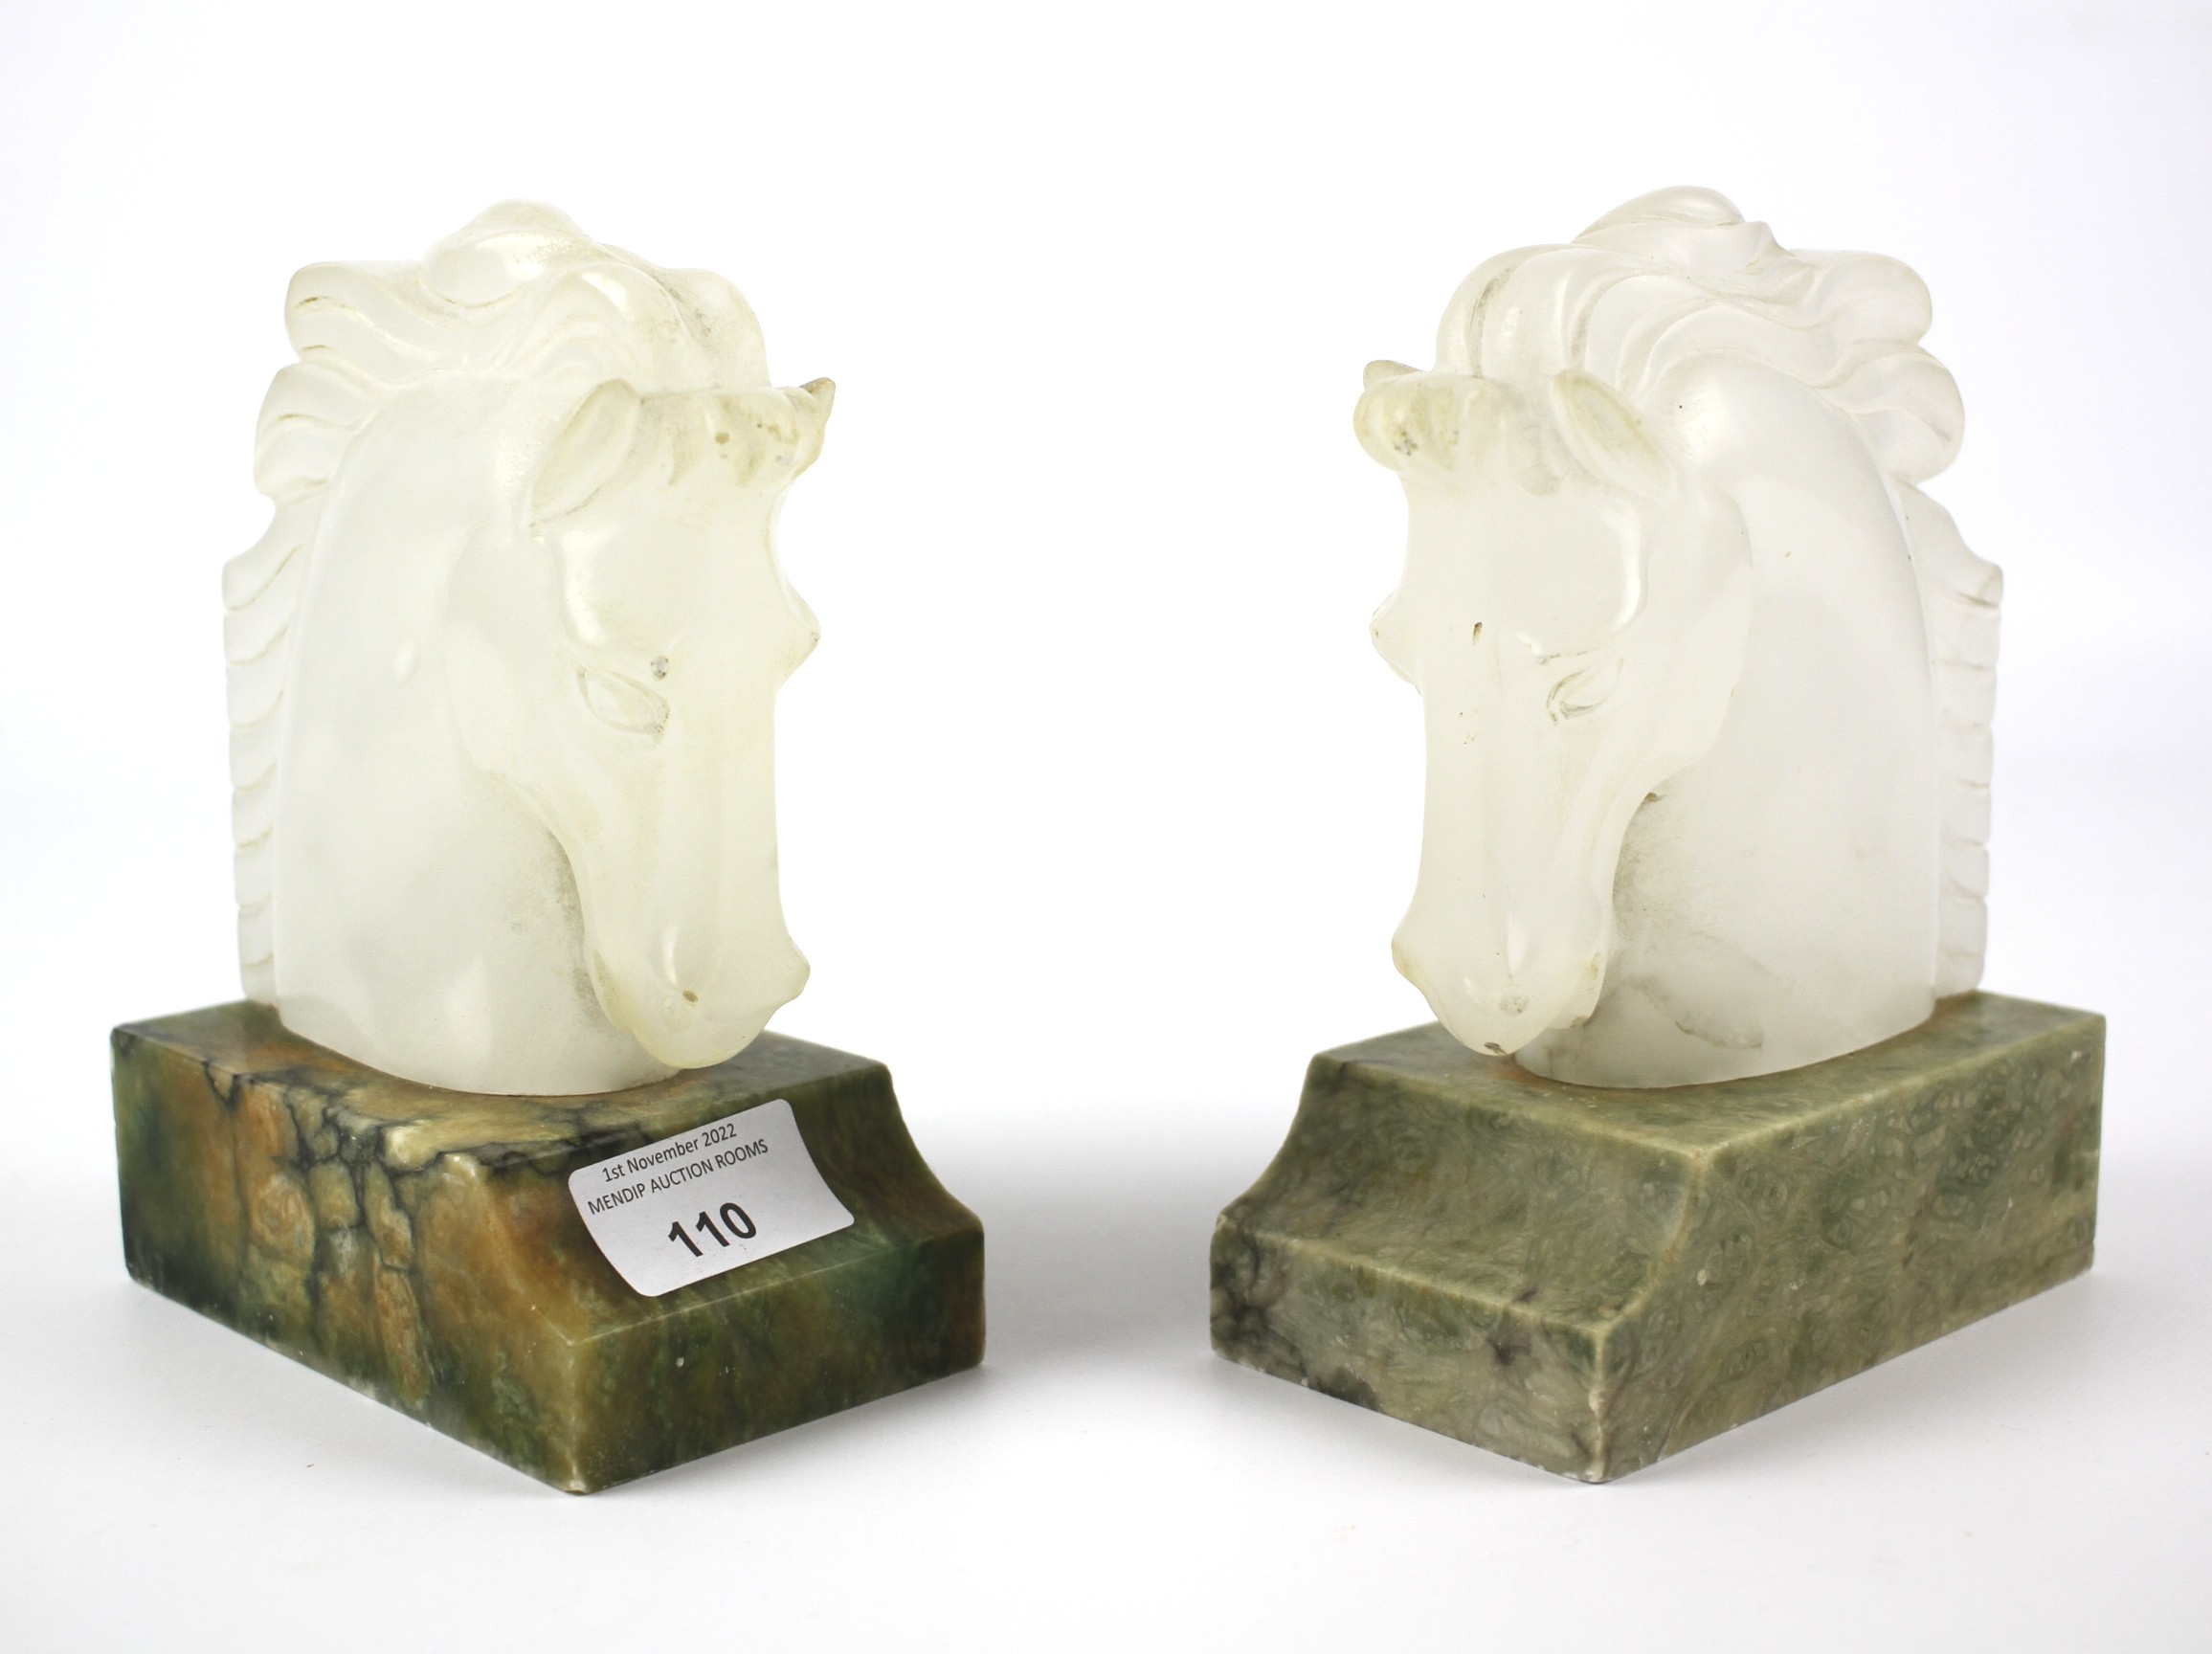 A pair of early 20th century carved onyx horse head book ends.